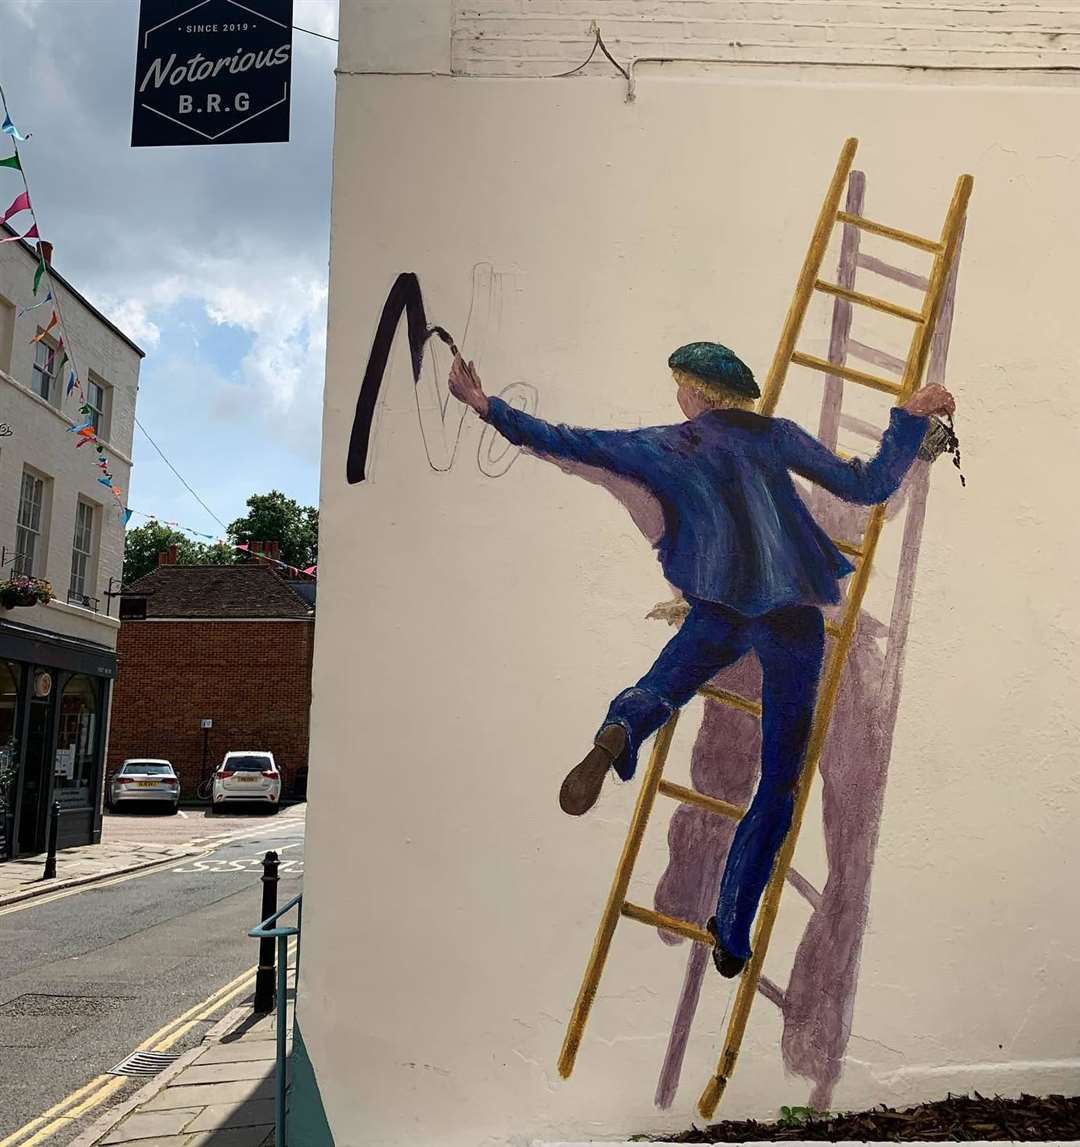 Lief Bruylant's mural at The Notorious BRG in Castle Street, Canterbury. Picture: Jonny Wall